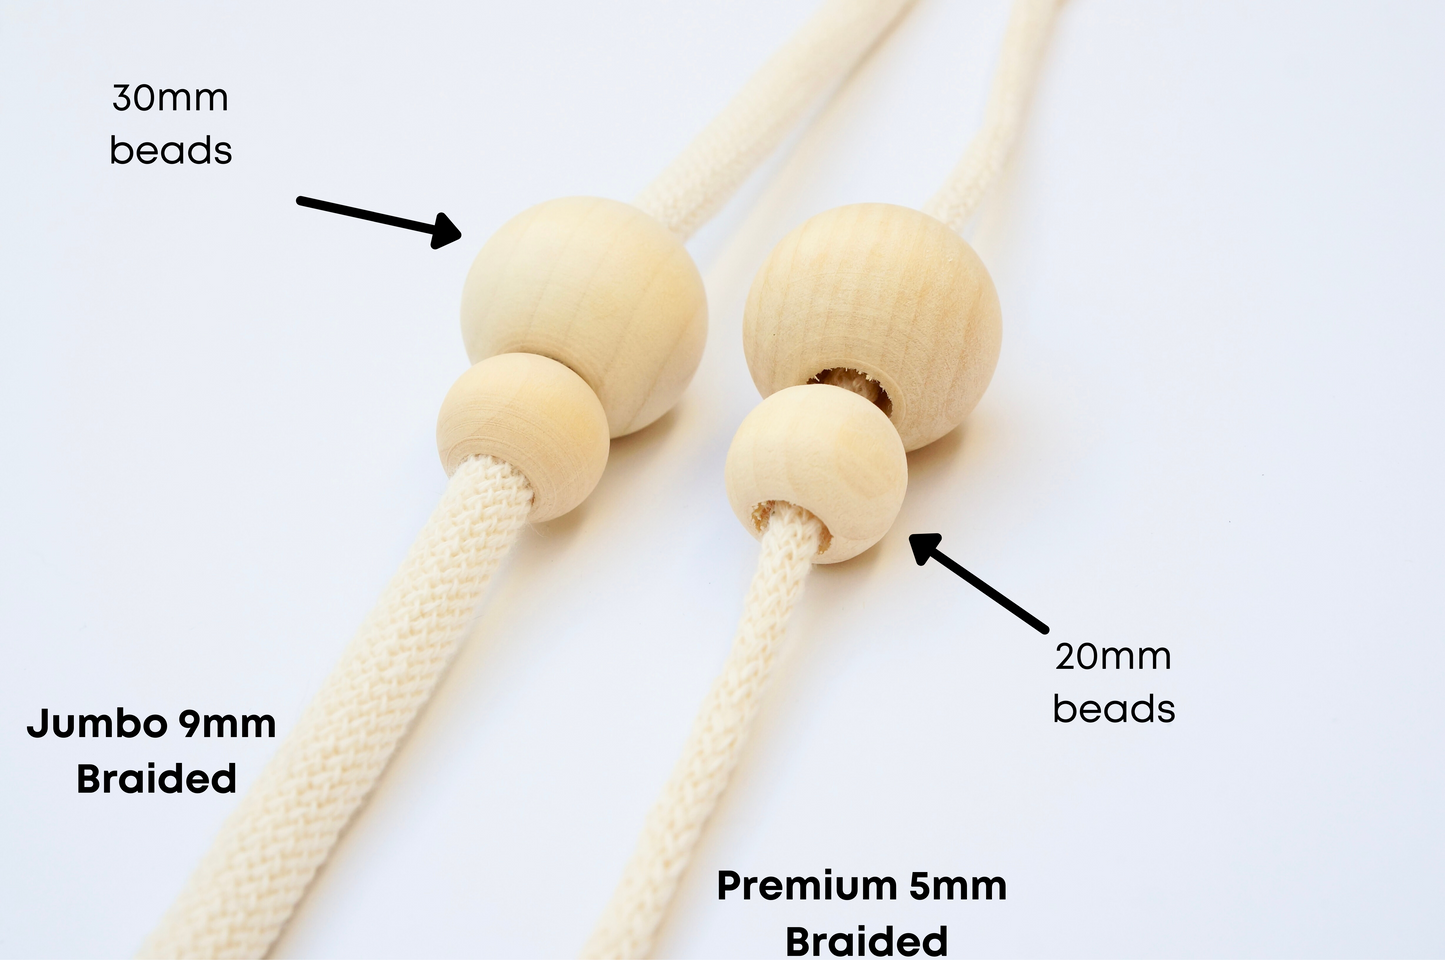 Wooden Beads (2 sizes available)